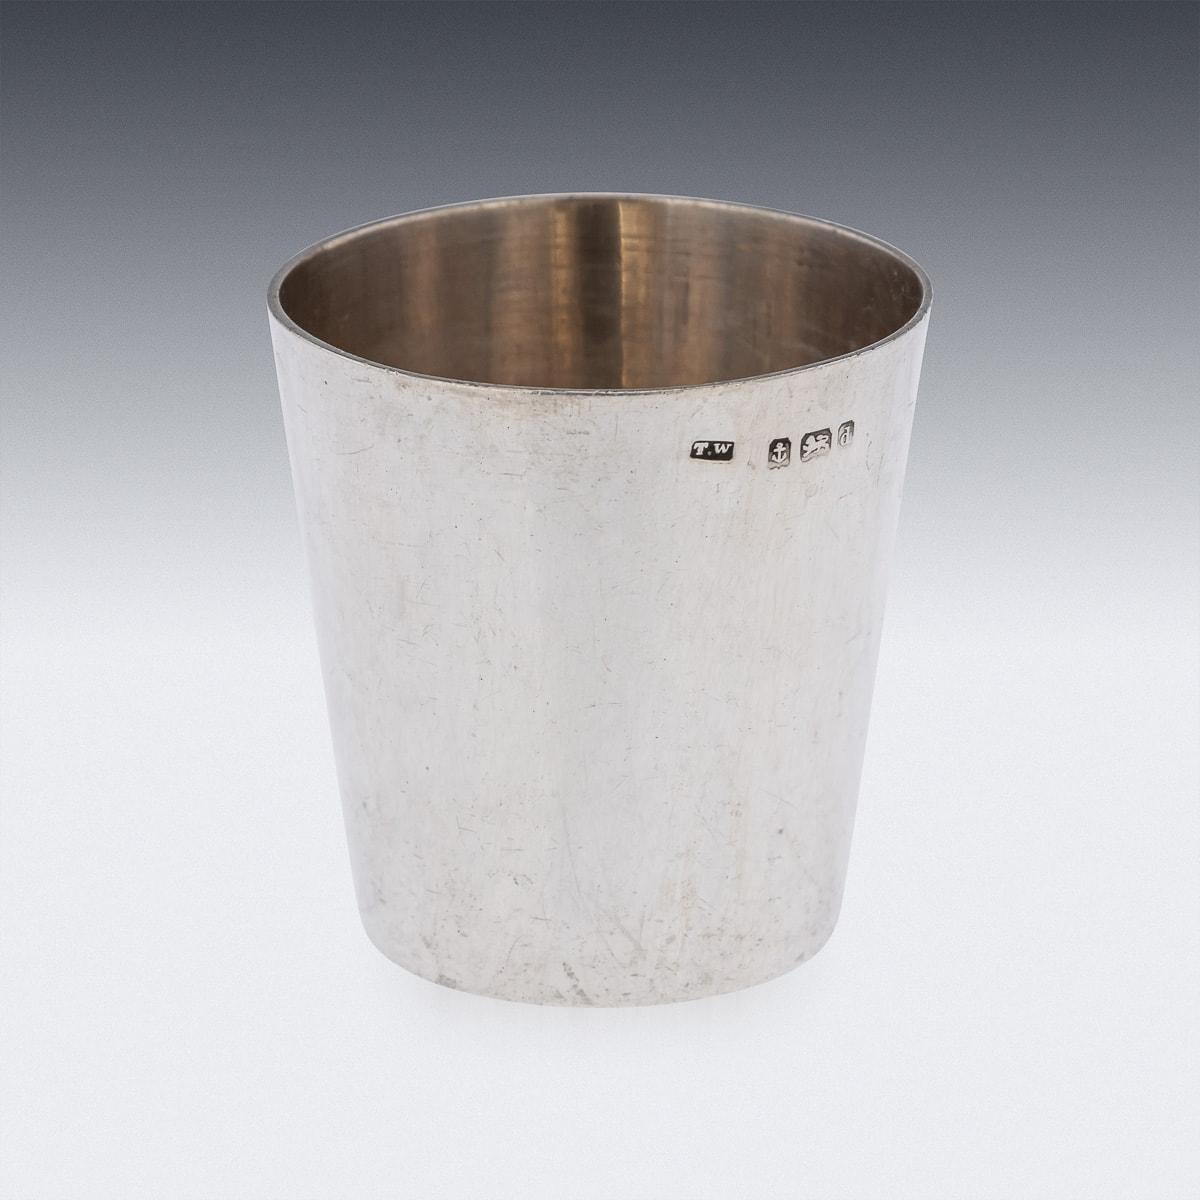 Antique 20th Century Edwardian solid silver spirit measure cup from the R.M.S Cedric. The measure, of traditional size in a tapering body form has an enamel White Star Line flag (Attribution to the famous Titanic company) on the centre middle,